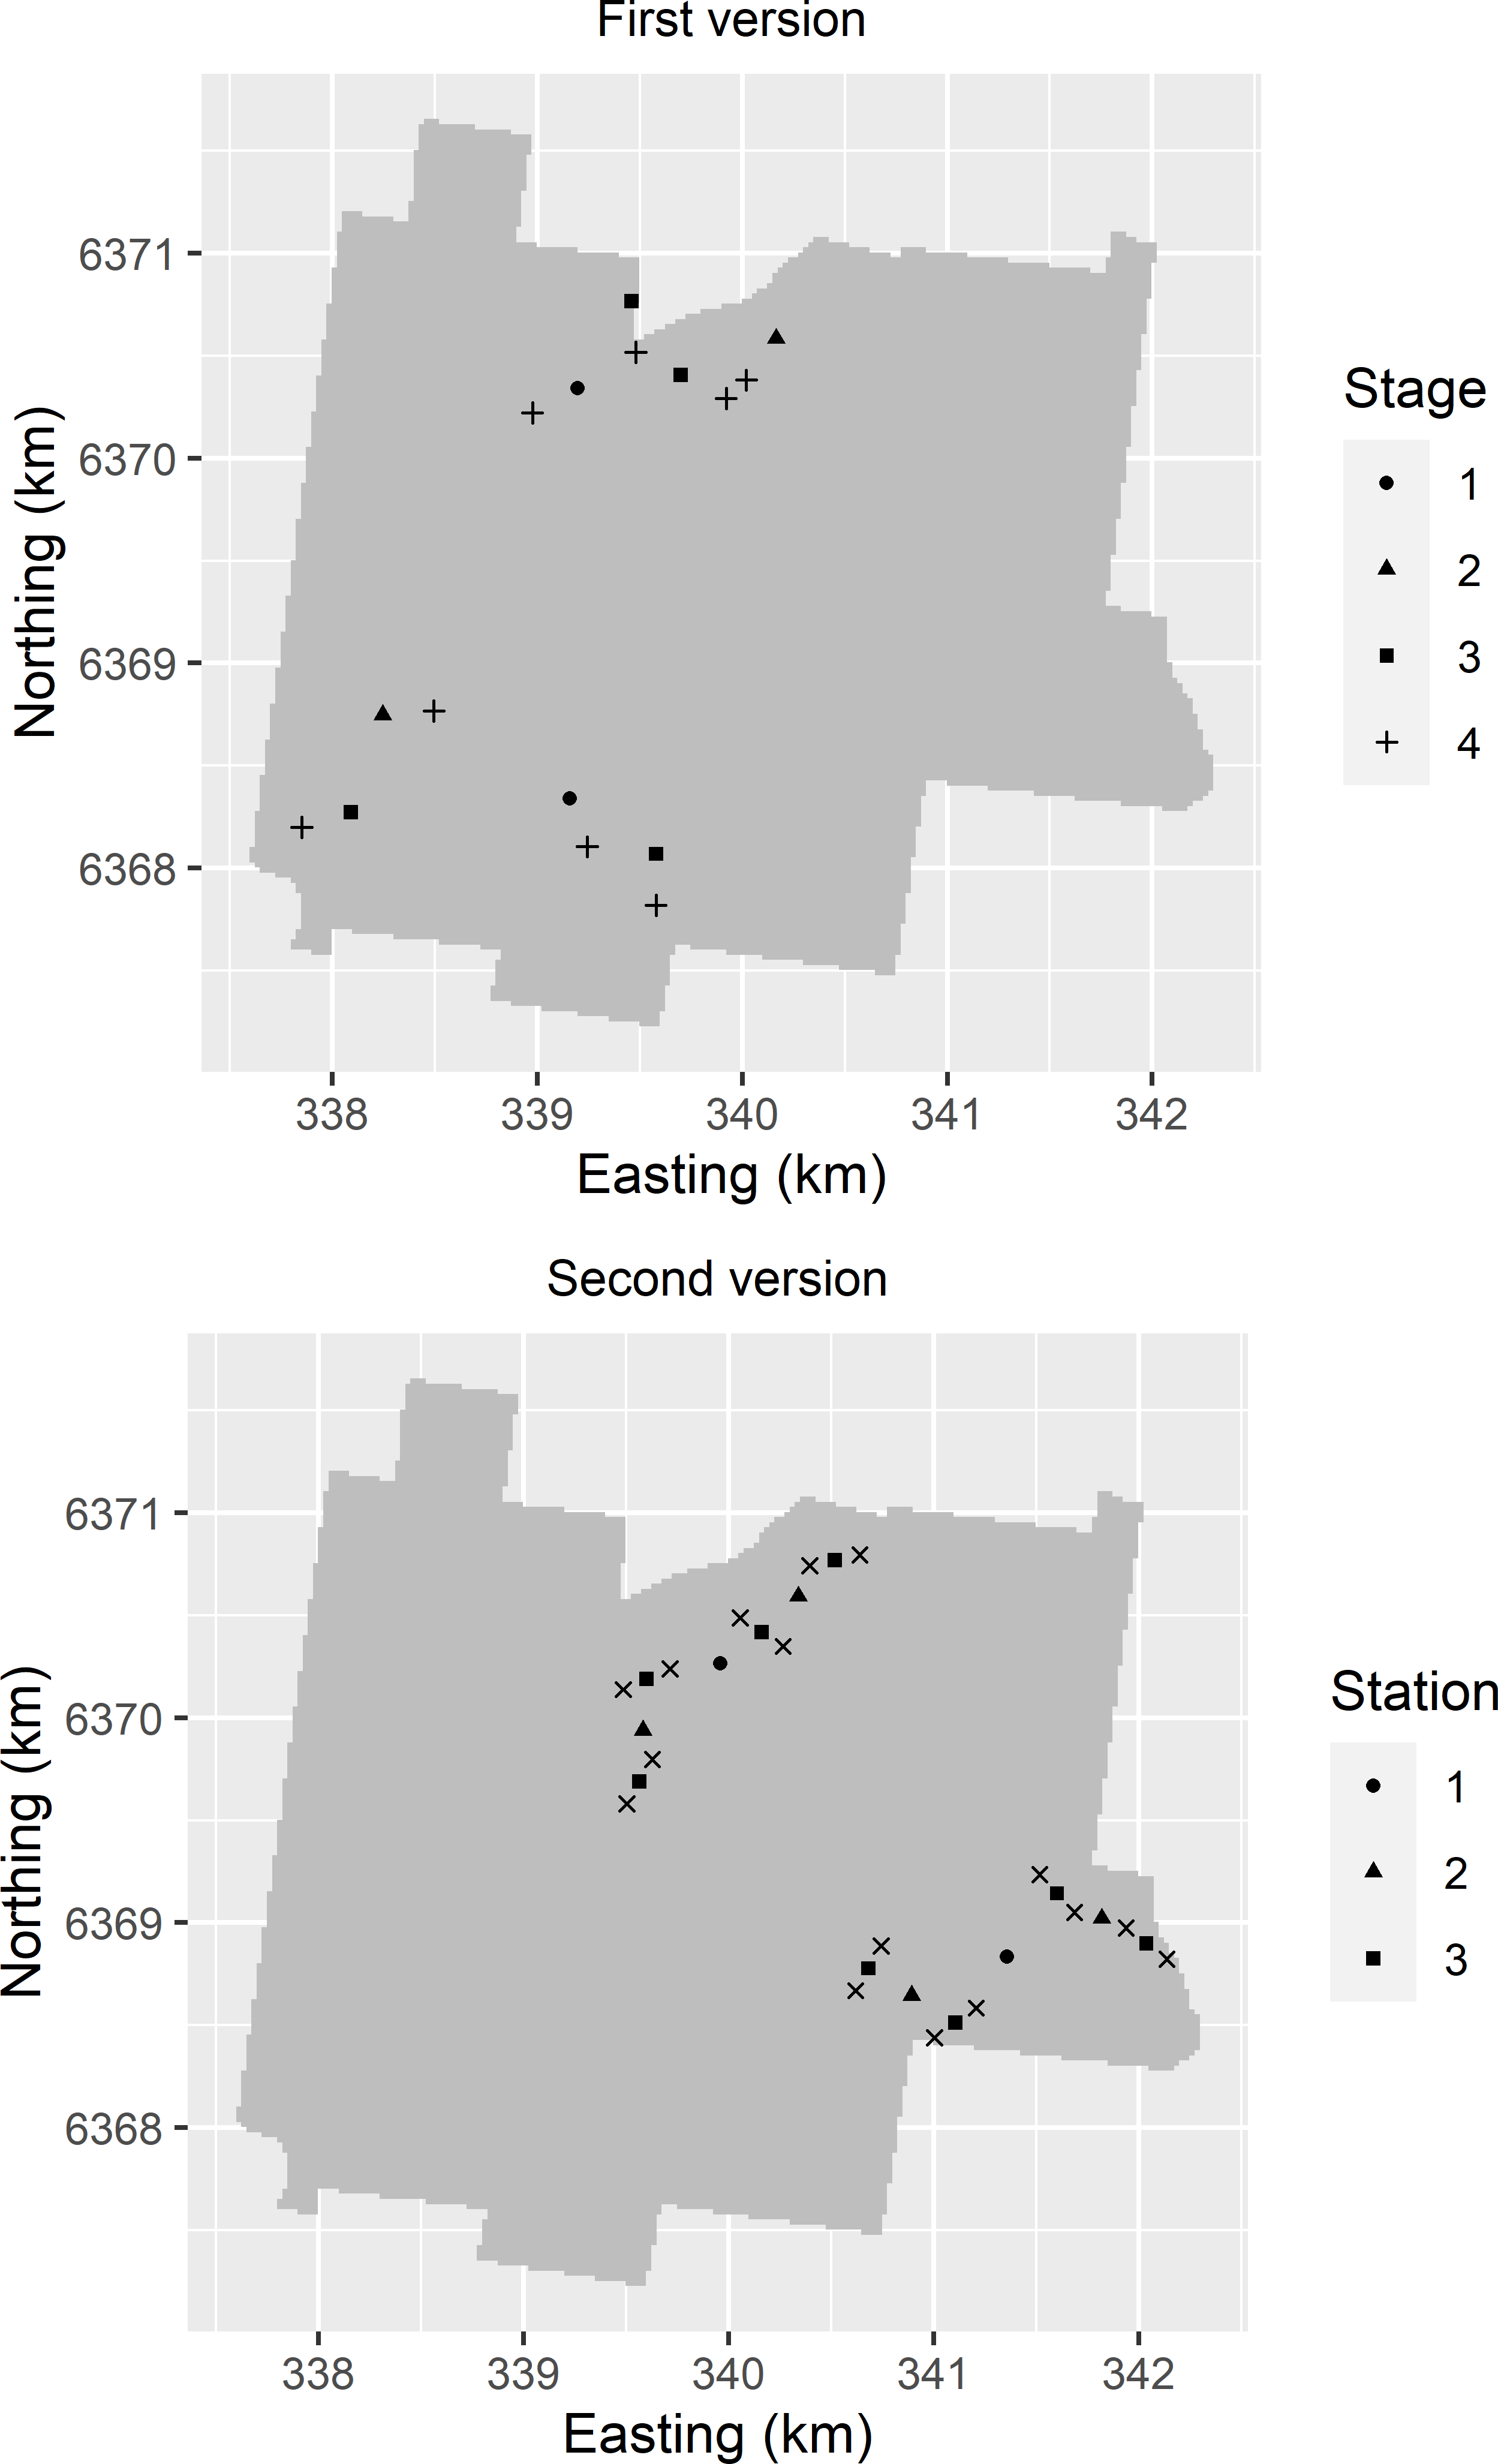 Balanced nested samples from Hunter Valley, selected with the two versions of nested sampling. In the subfigure of the second version the selected sampling points (symbol x) are plotted together with the selected stations (halfway the two points of a pair).